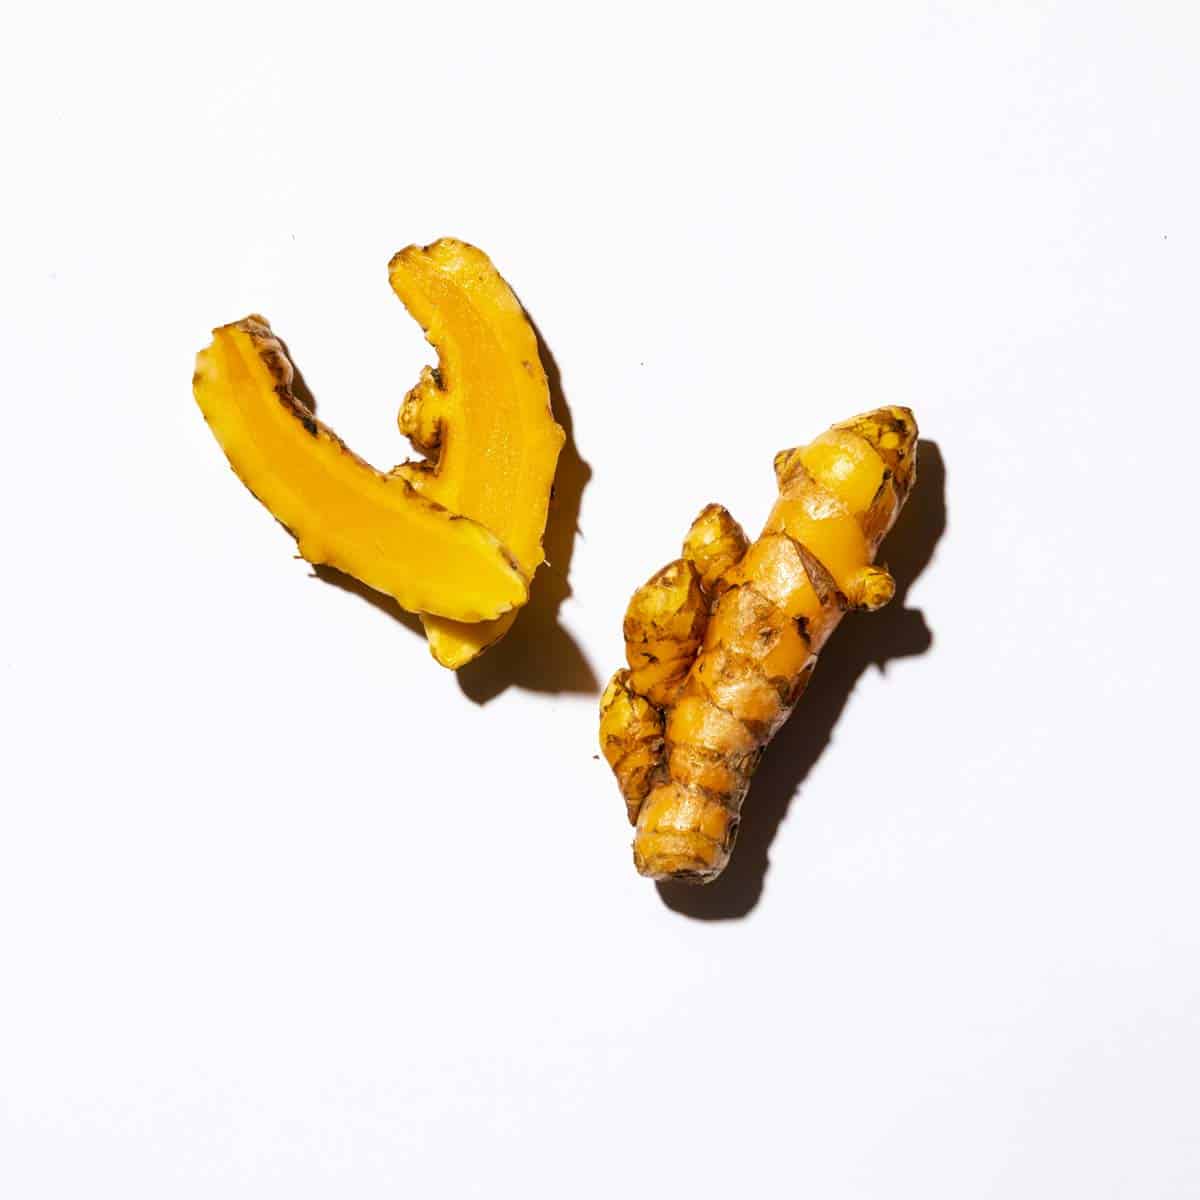 turmeric root on white background